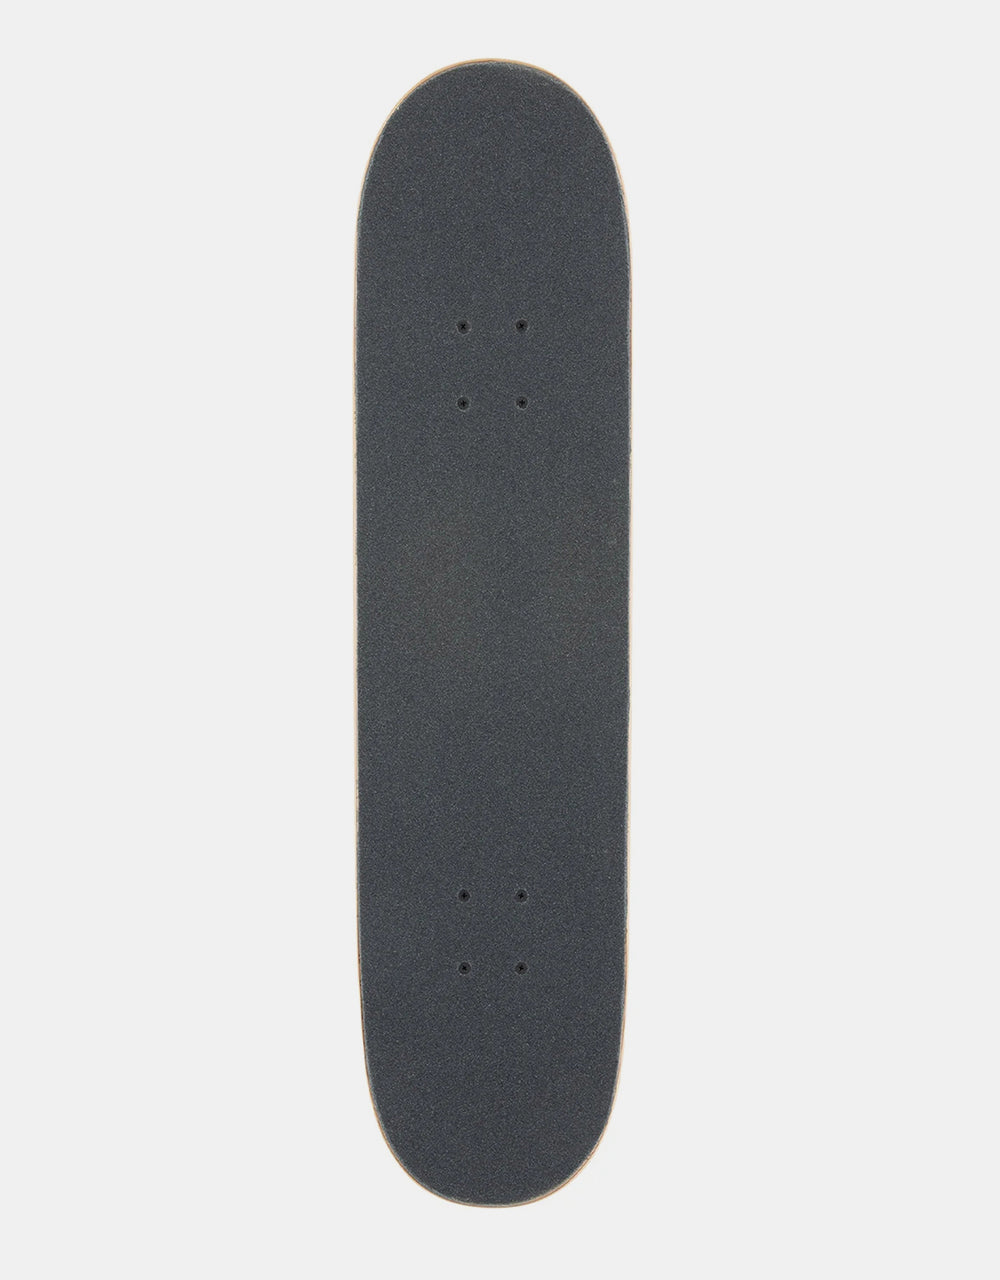 Arbor Whiskey Upcycle Complete Skateboard - 7.75"